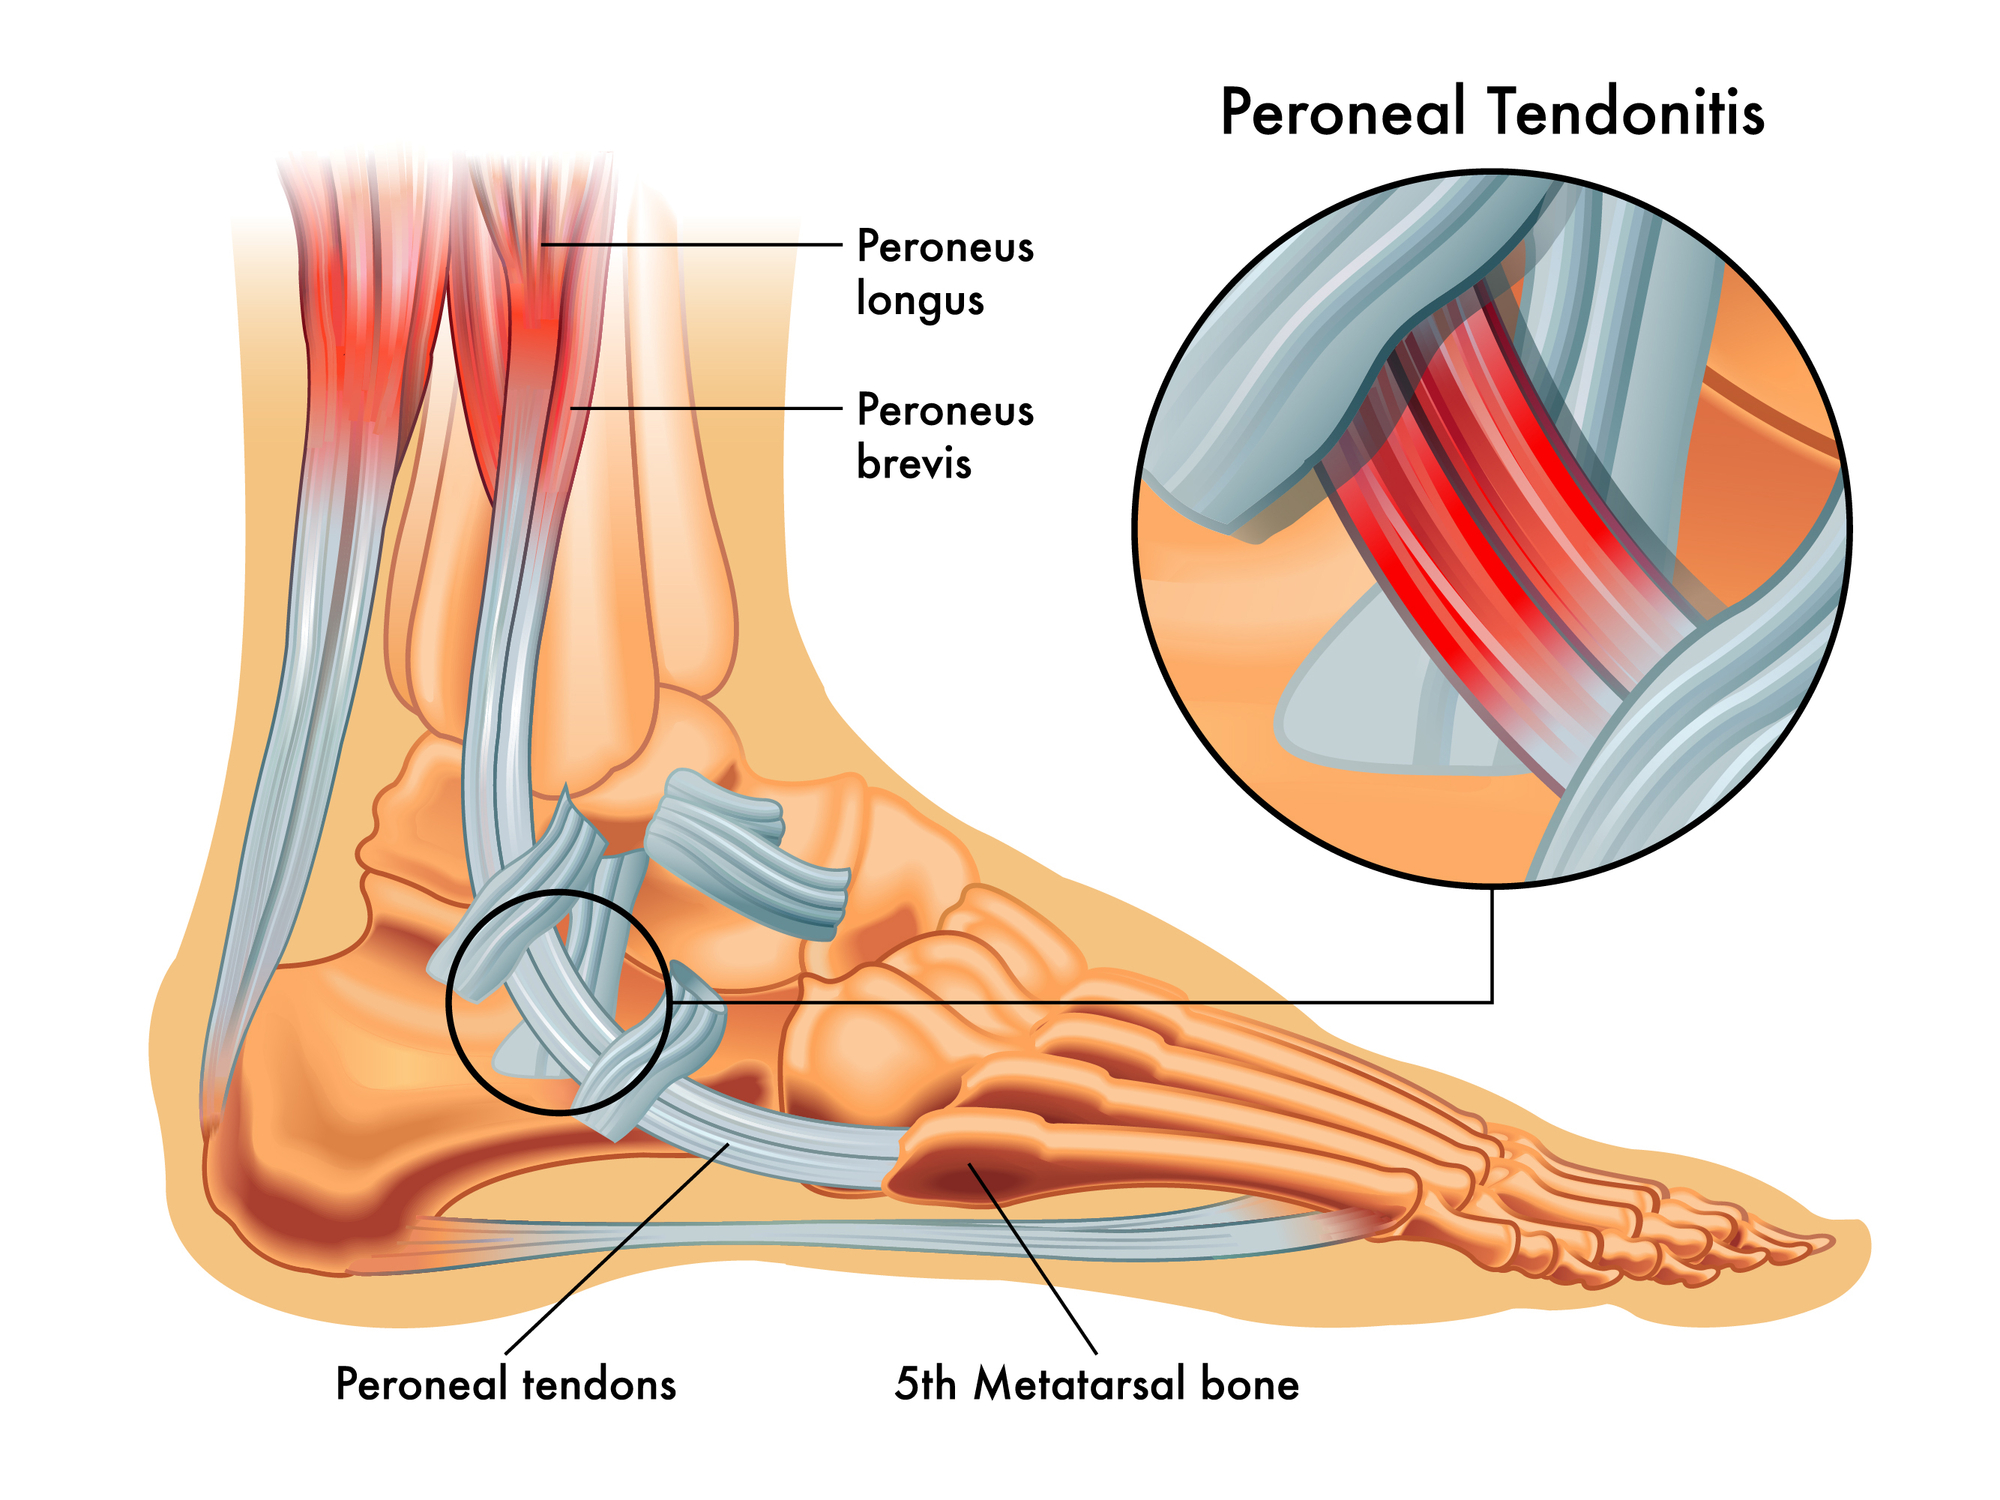 Peroneal tendonitis: throw the kitchen sink at it